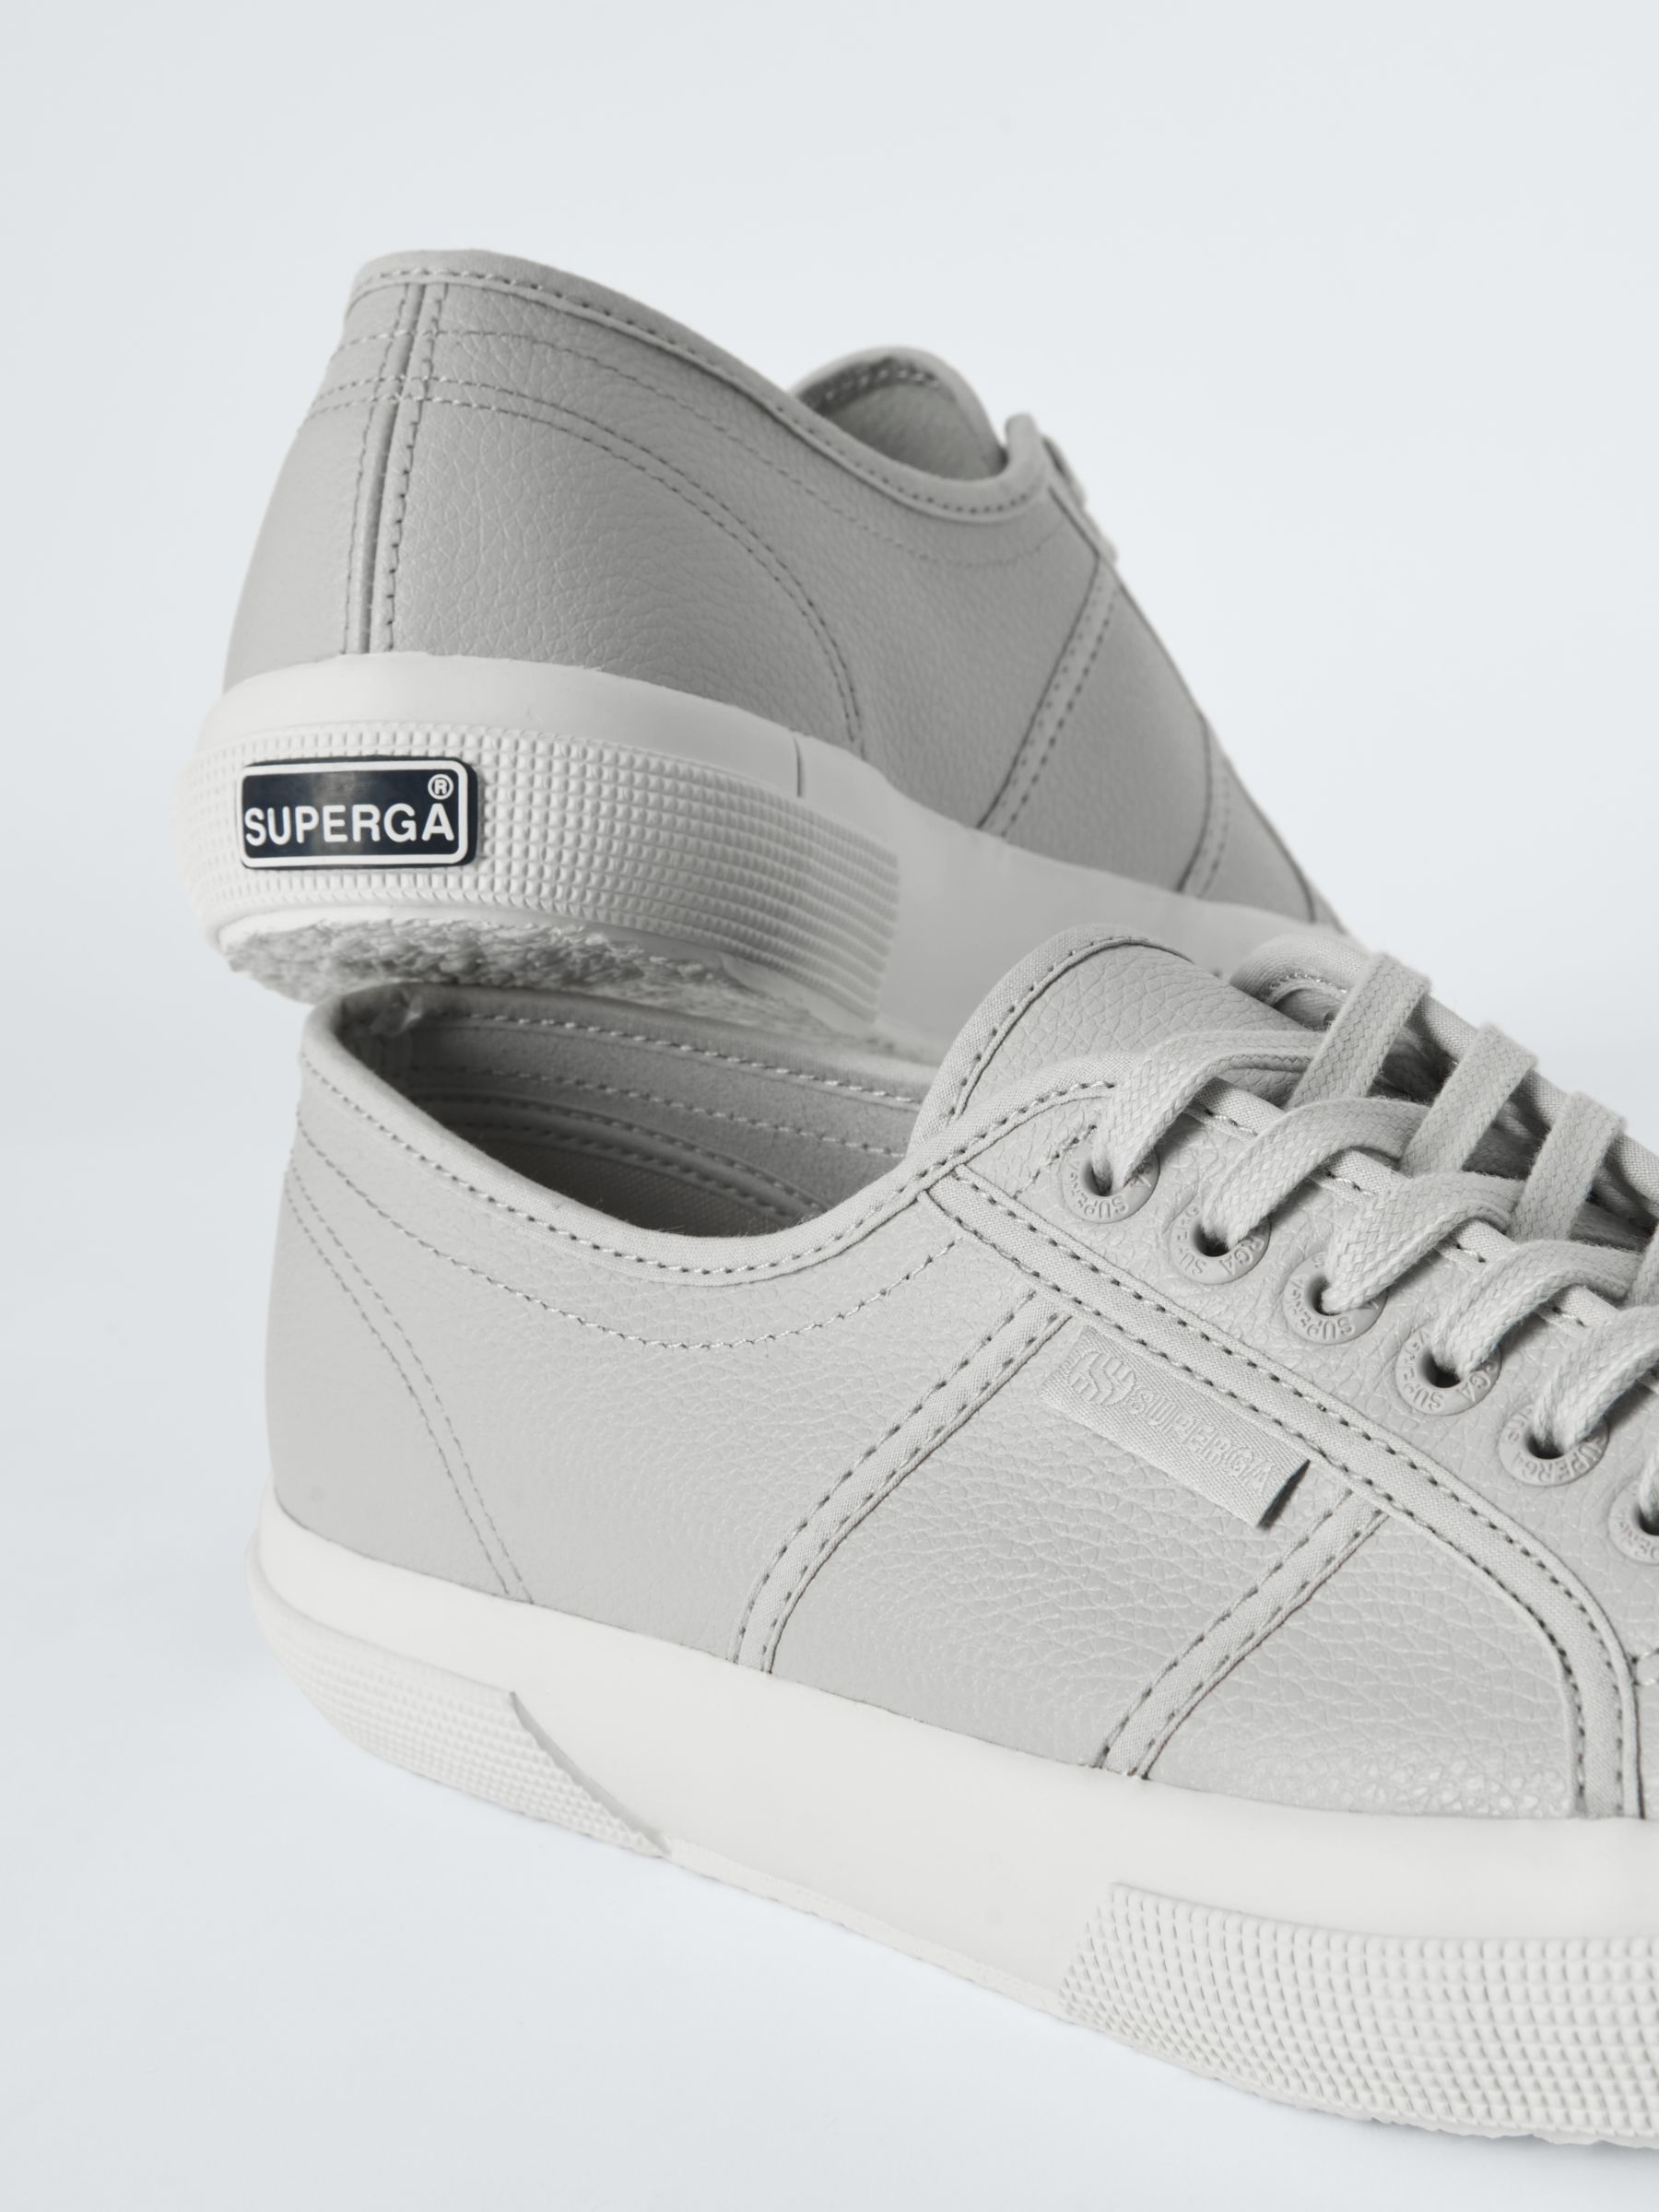 Superga 2750 Leather Trainers, Grey Silver at John Lewis & Partners